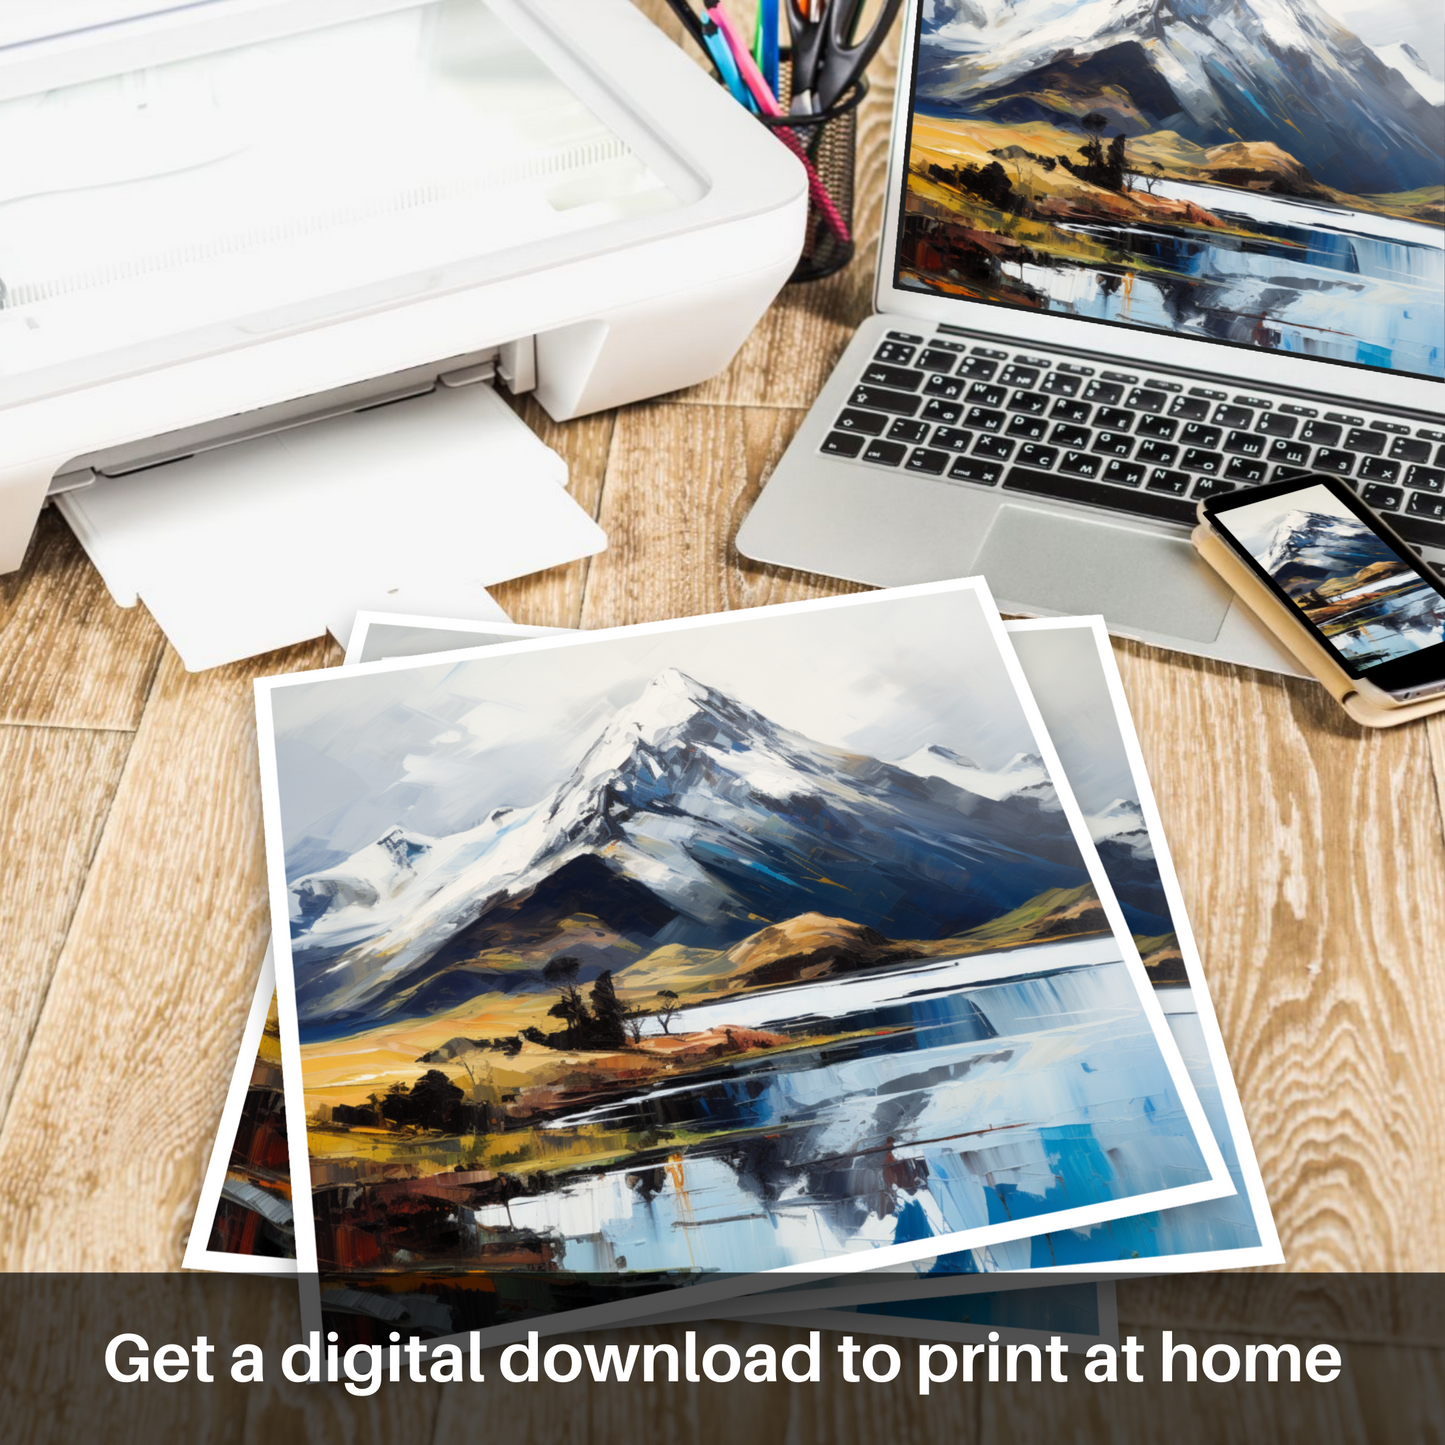 Downloadable and printable picture of Snow-capped peaks overlooking Loch Lomond